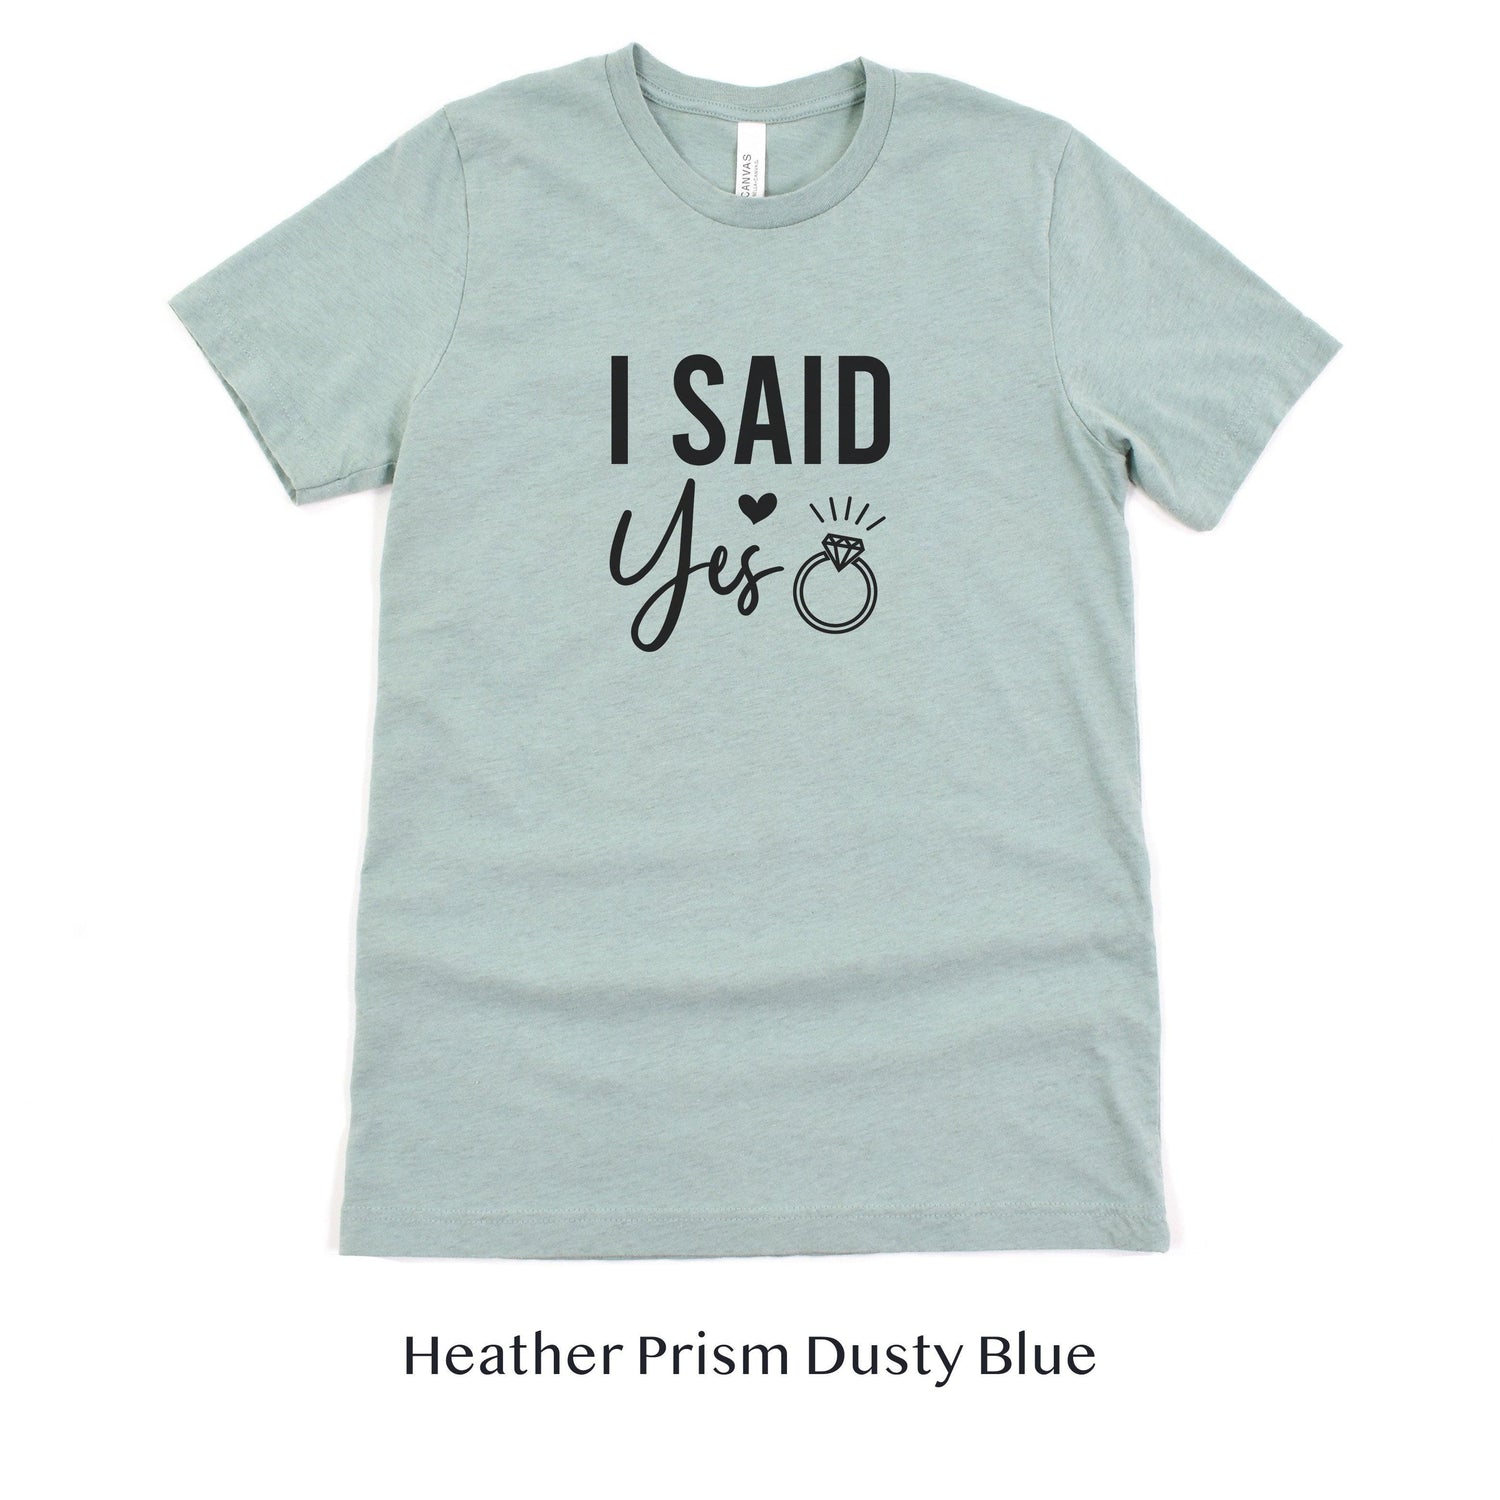 I said Yes - Engagement Bride to be Short-sleeve unisex Tee by Oaklynn Lane